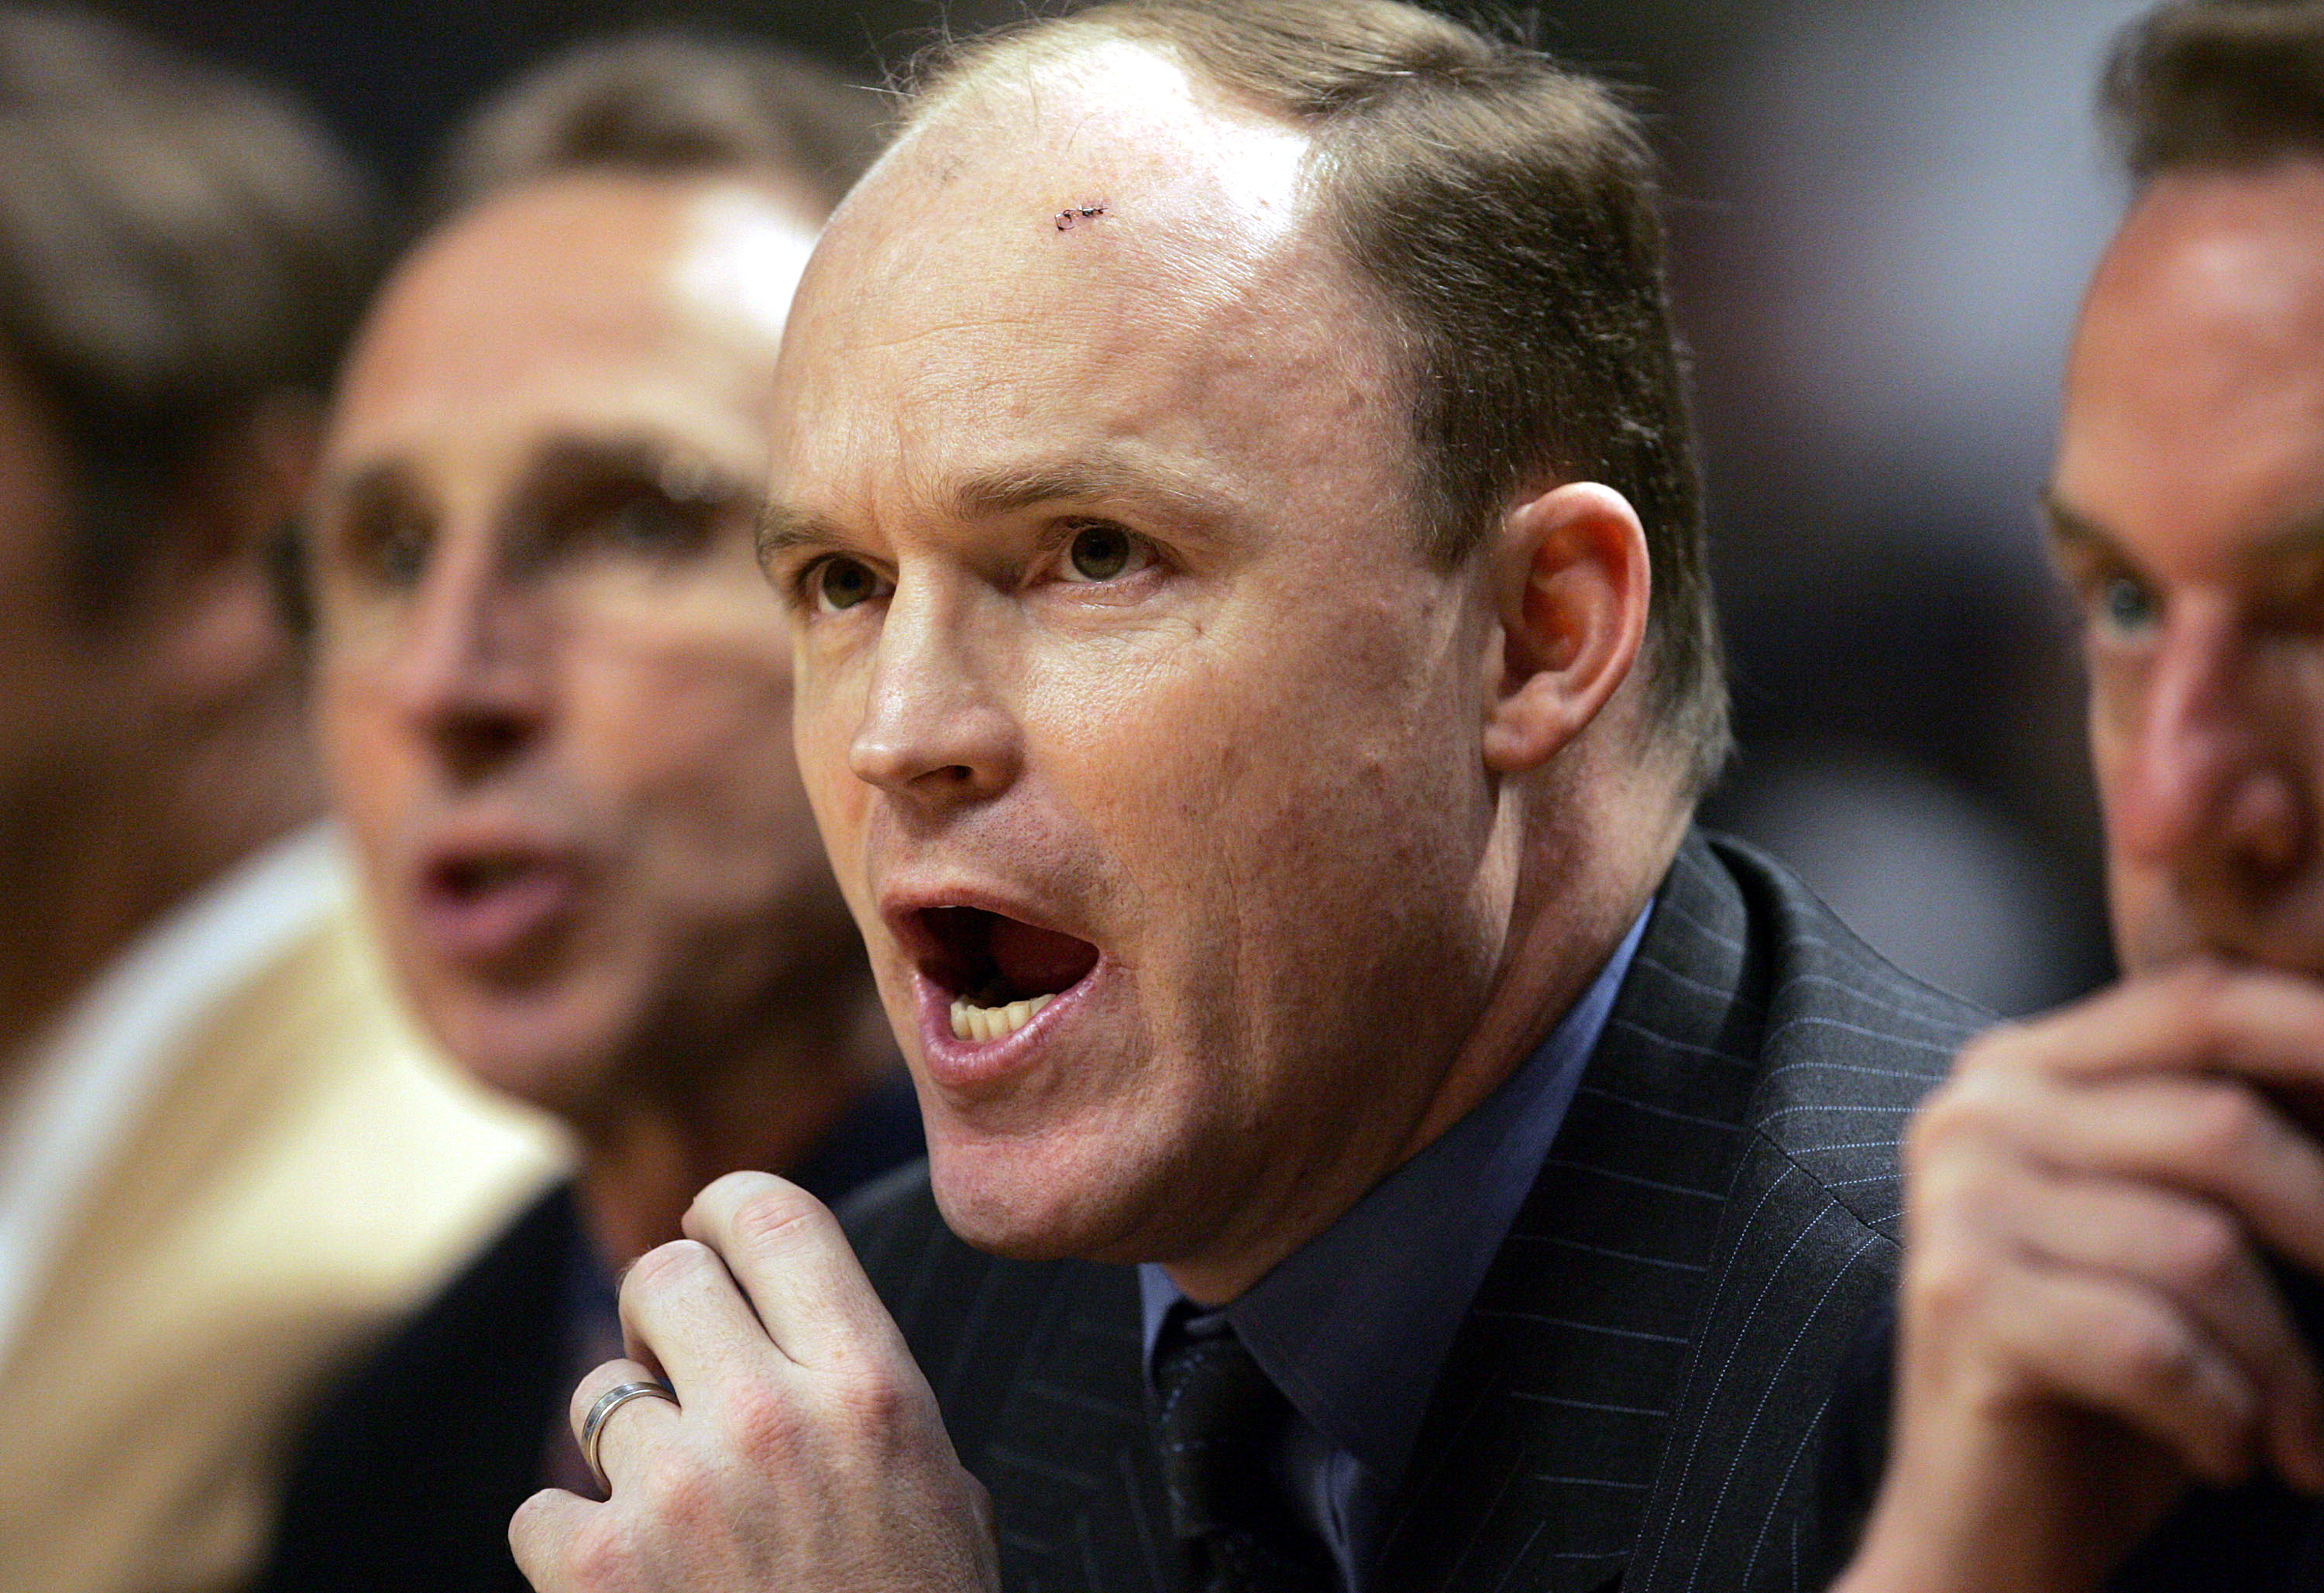 1990) Orlando's Scott Skiles sets NBA record with 30 assists